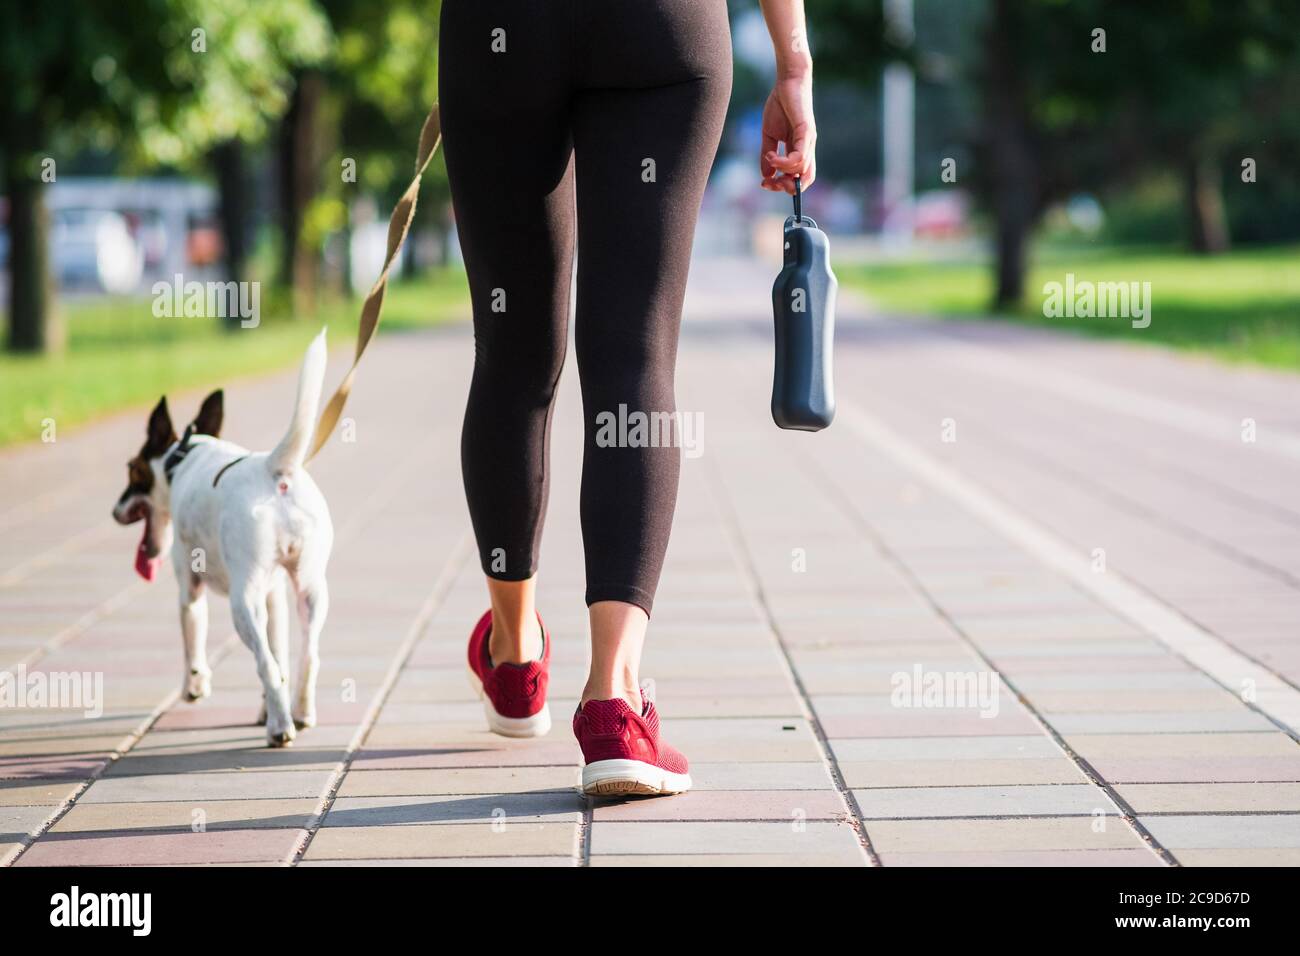 Smooth fox terrier dog walks next to a woman in jogging outfit. Active lifestyle with pets in town, pet accessories, running with dogs Stock Photo